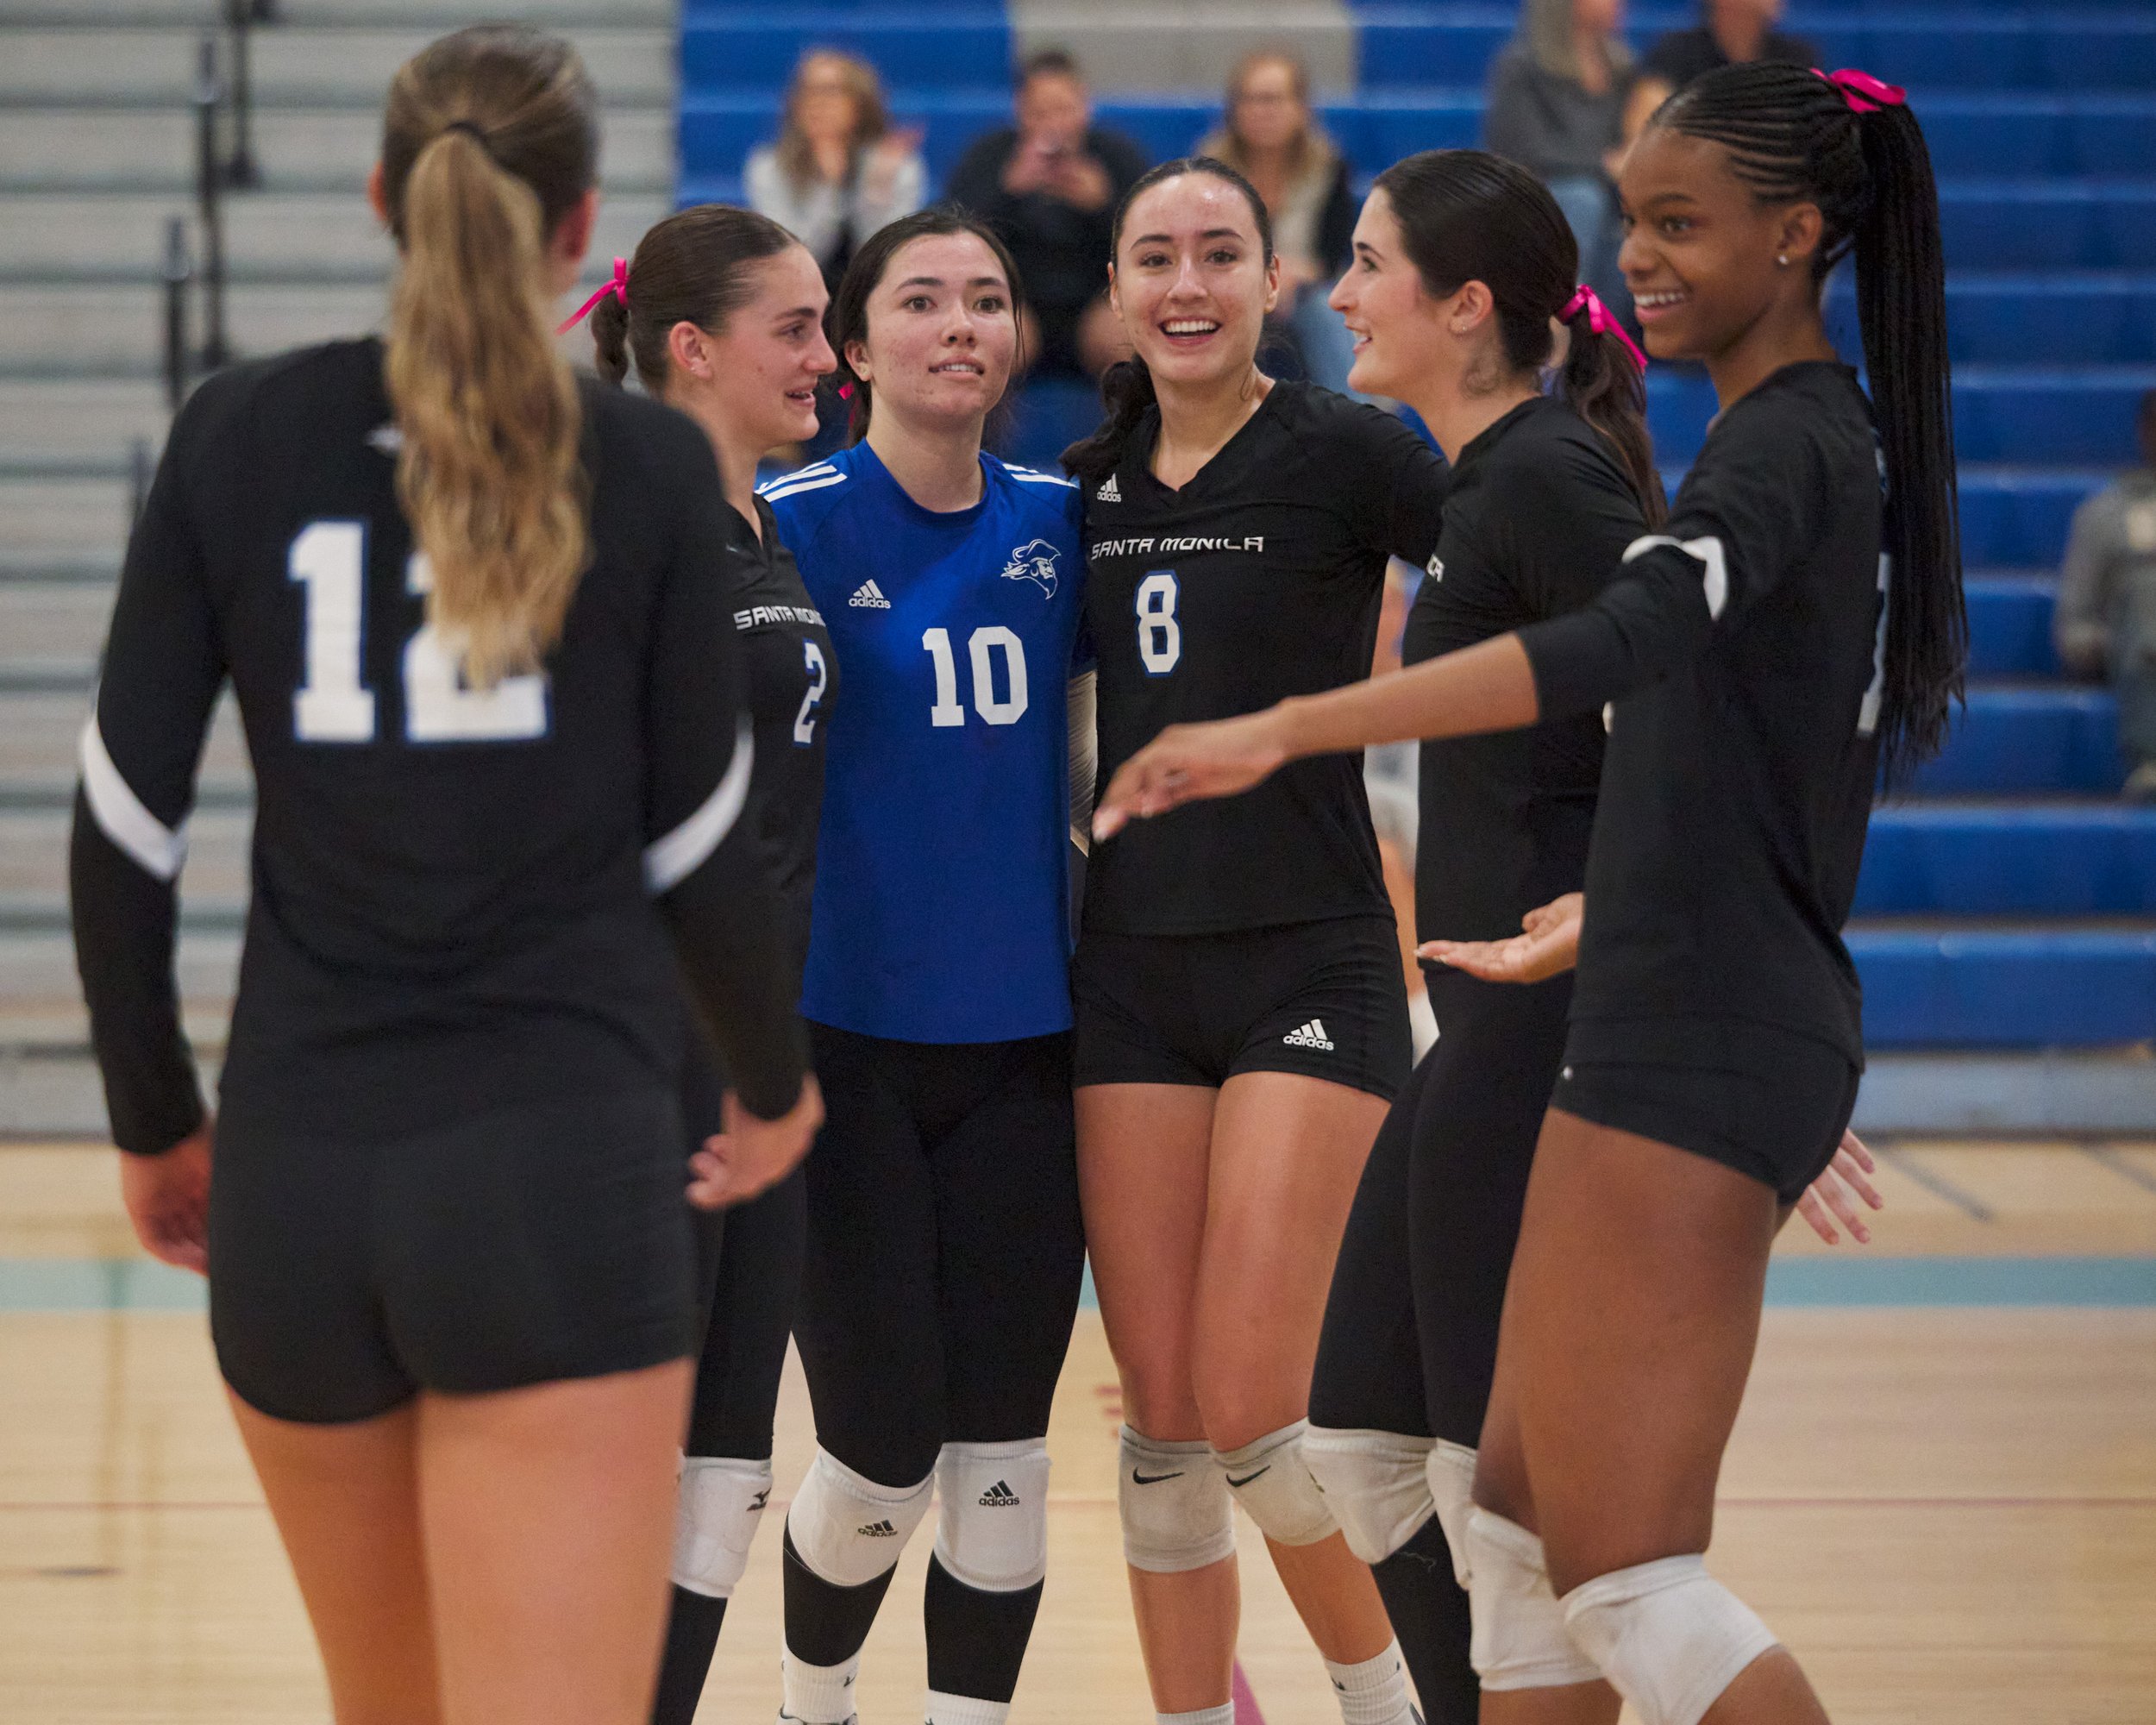  Santa Monica College Corsairs' Mia Paulson, Prior Borick, Sophia Odle, Natalie Fernandez, Maiella Riva, and Zarha Stanton during the women's volleyball match against the Citrus College Owls on Wednesday, Oct. 25, 2026, at Corsair Gym in Santa Monica